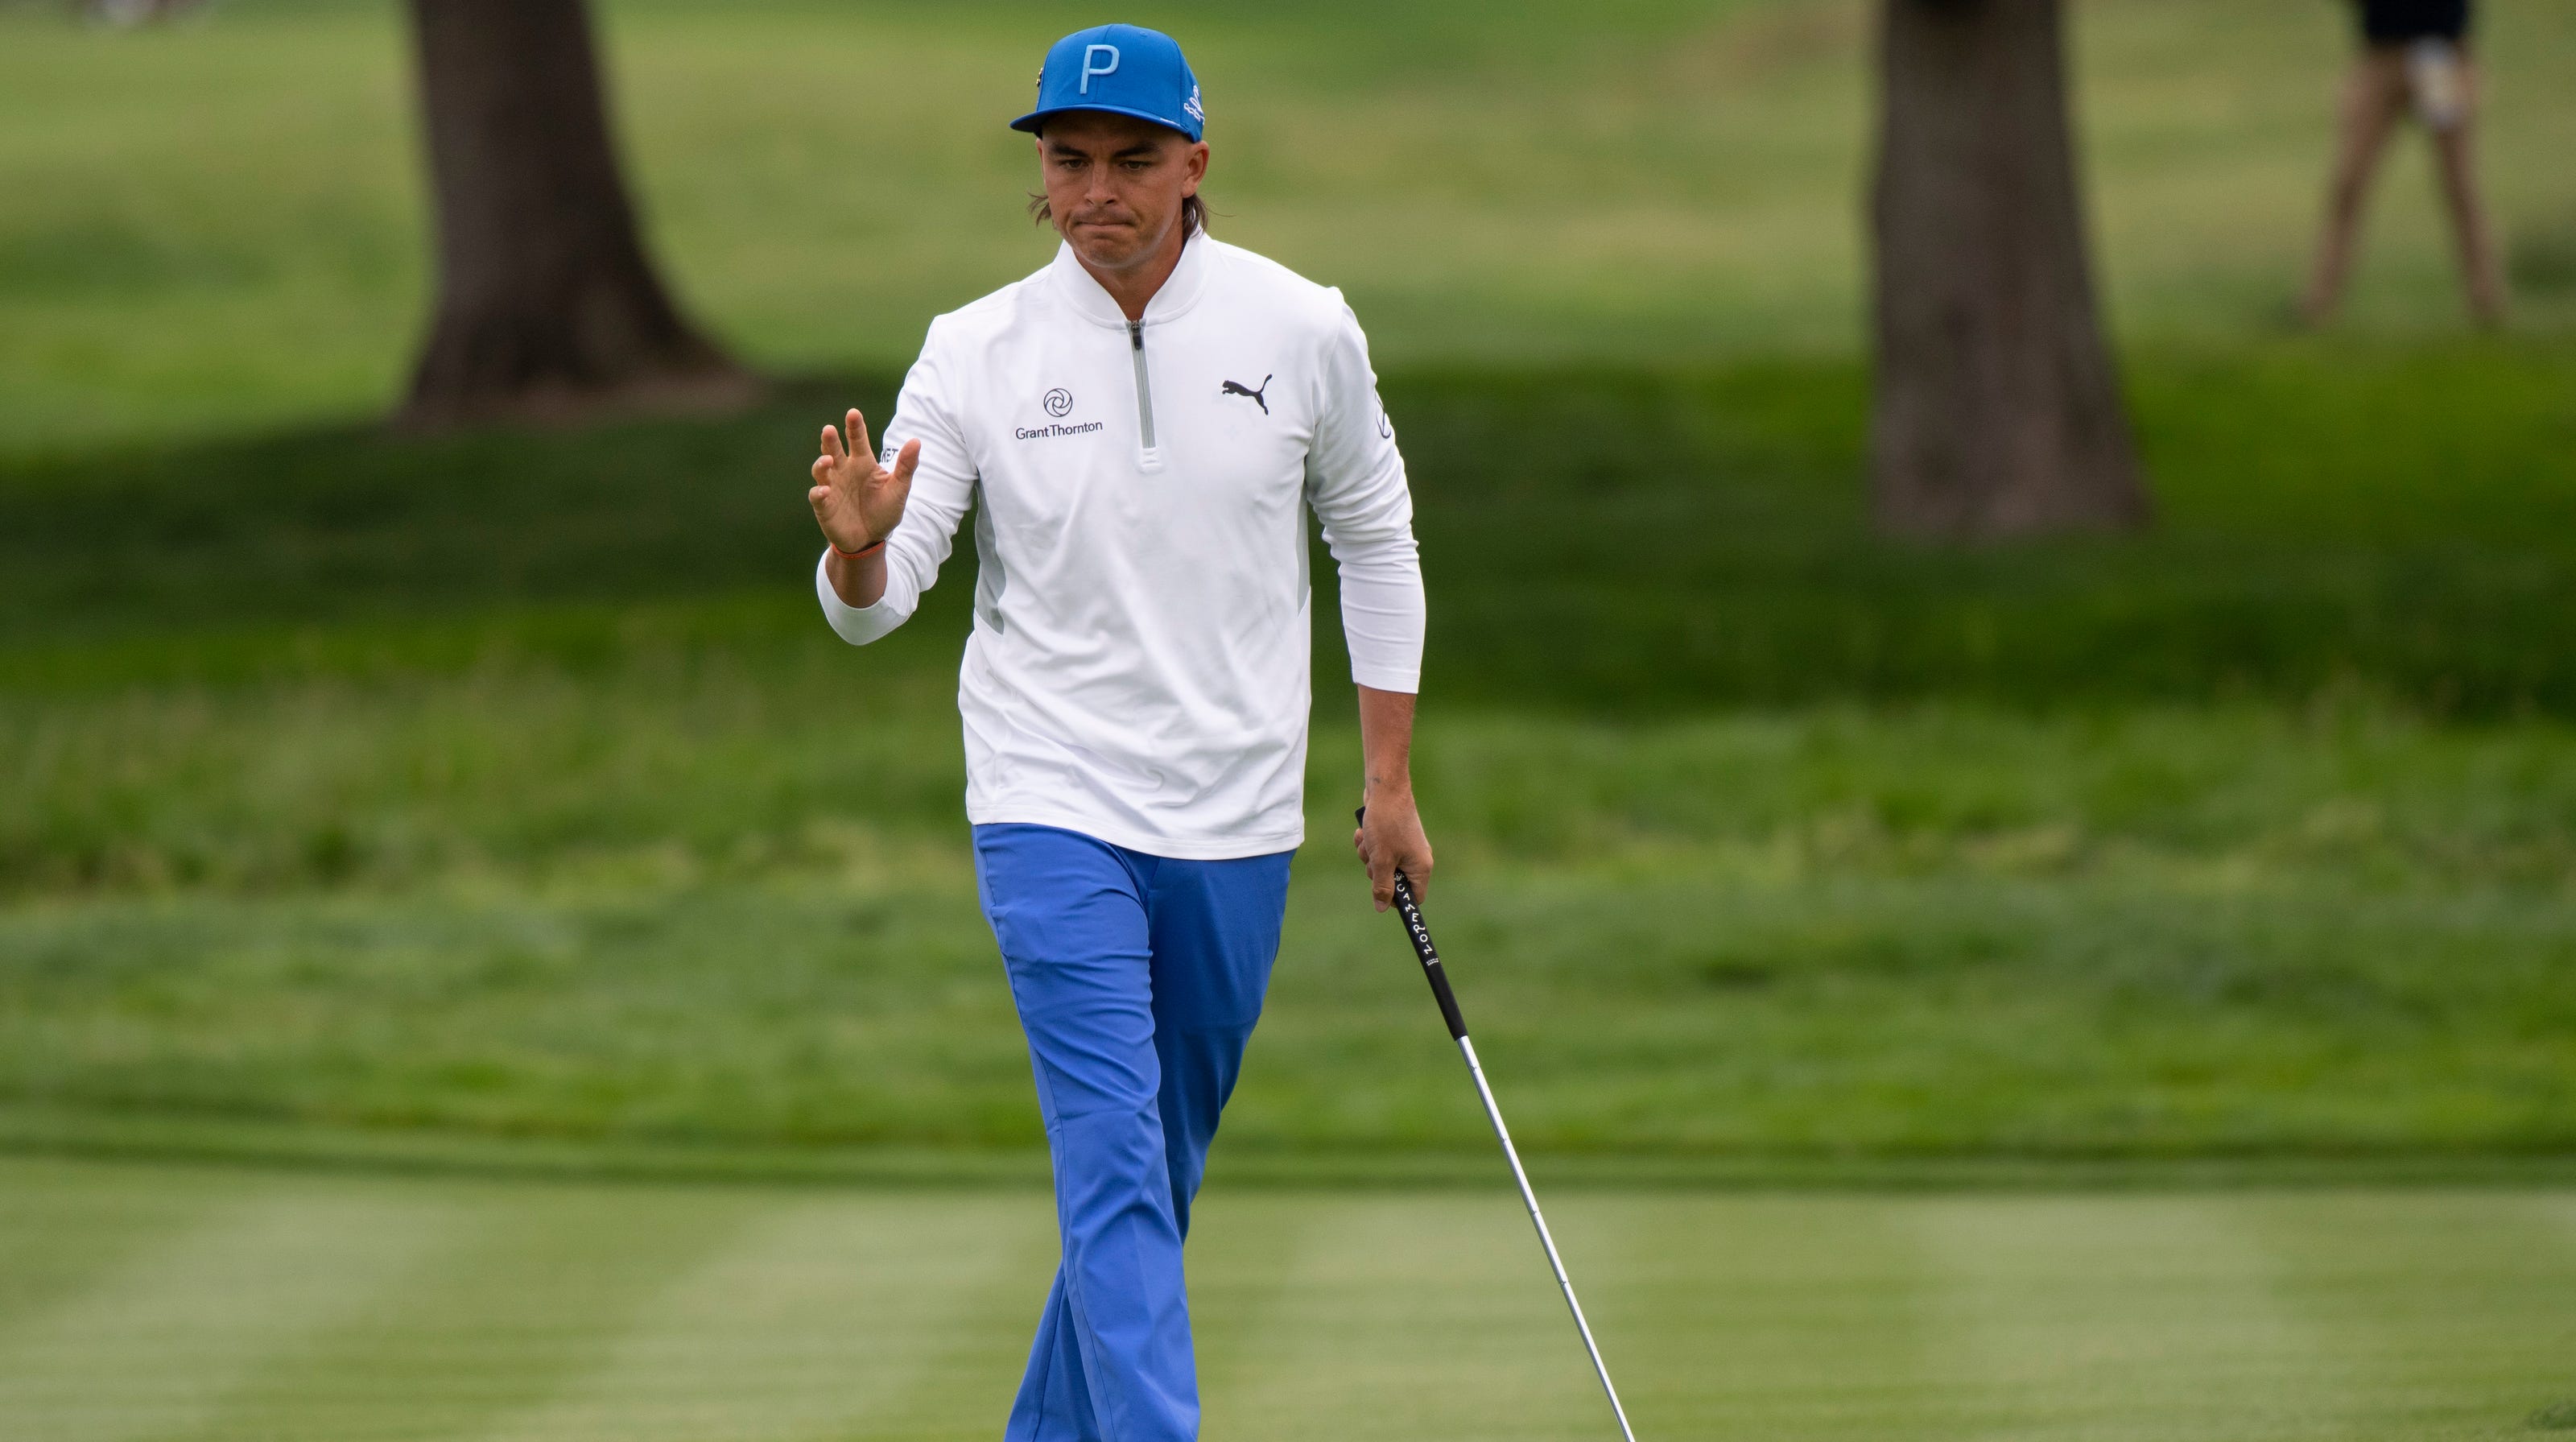 US Open: Rickie Fowler is one shot back at Pebble Beach with 66